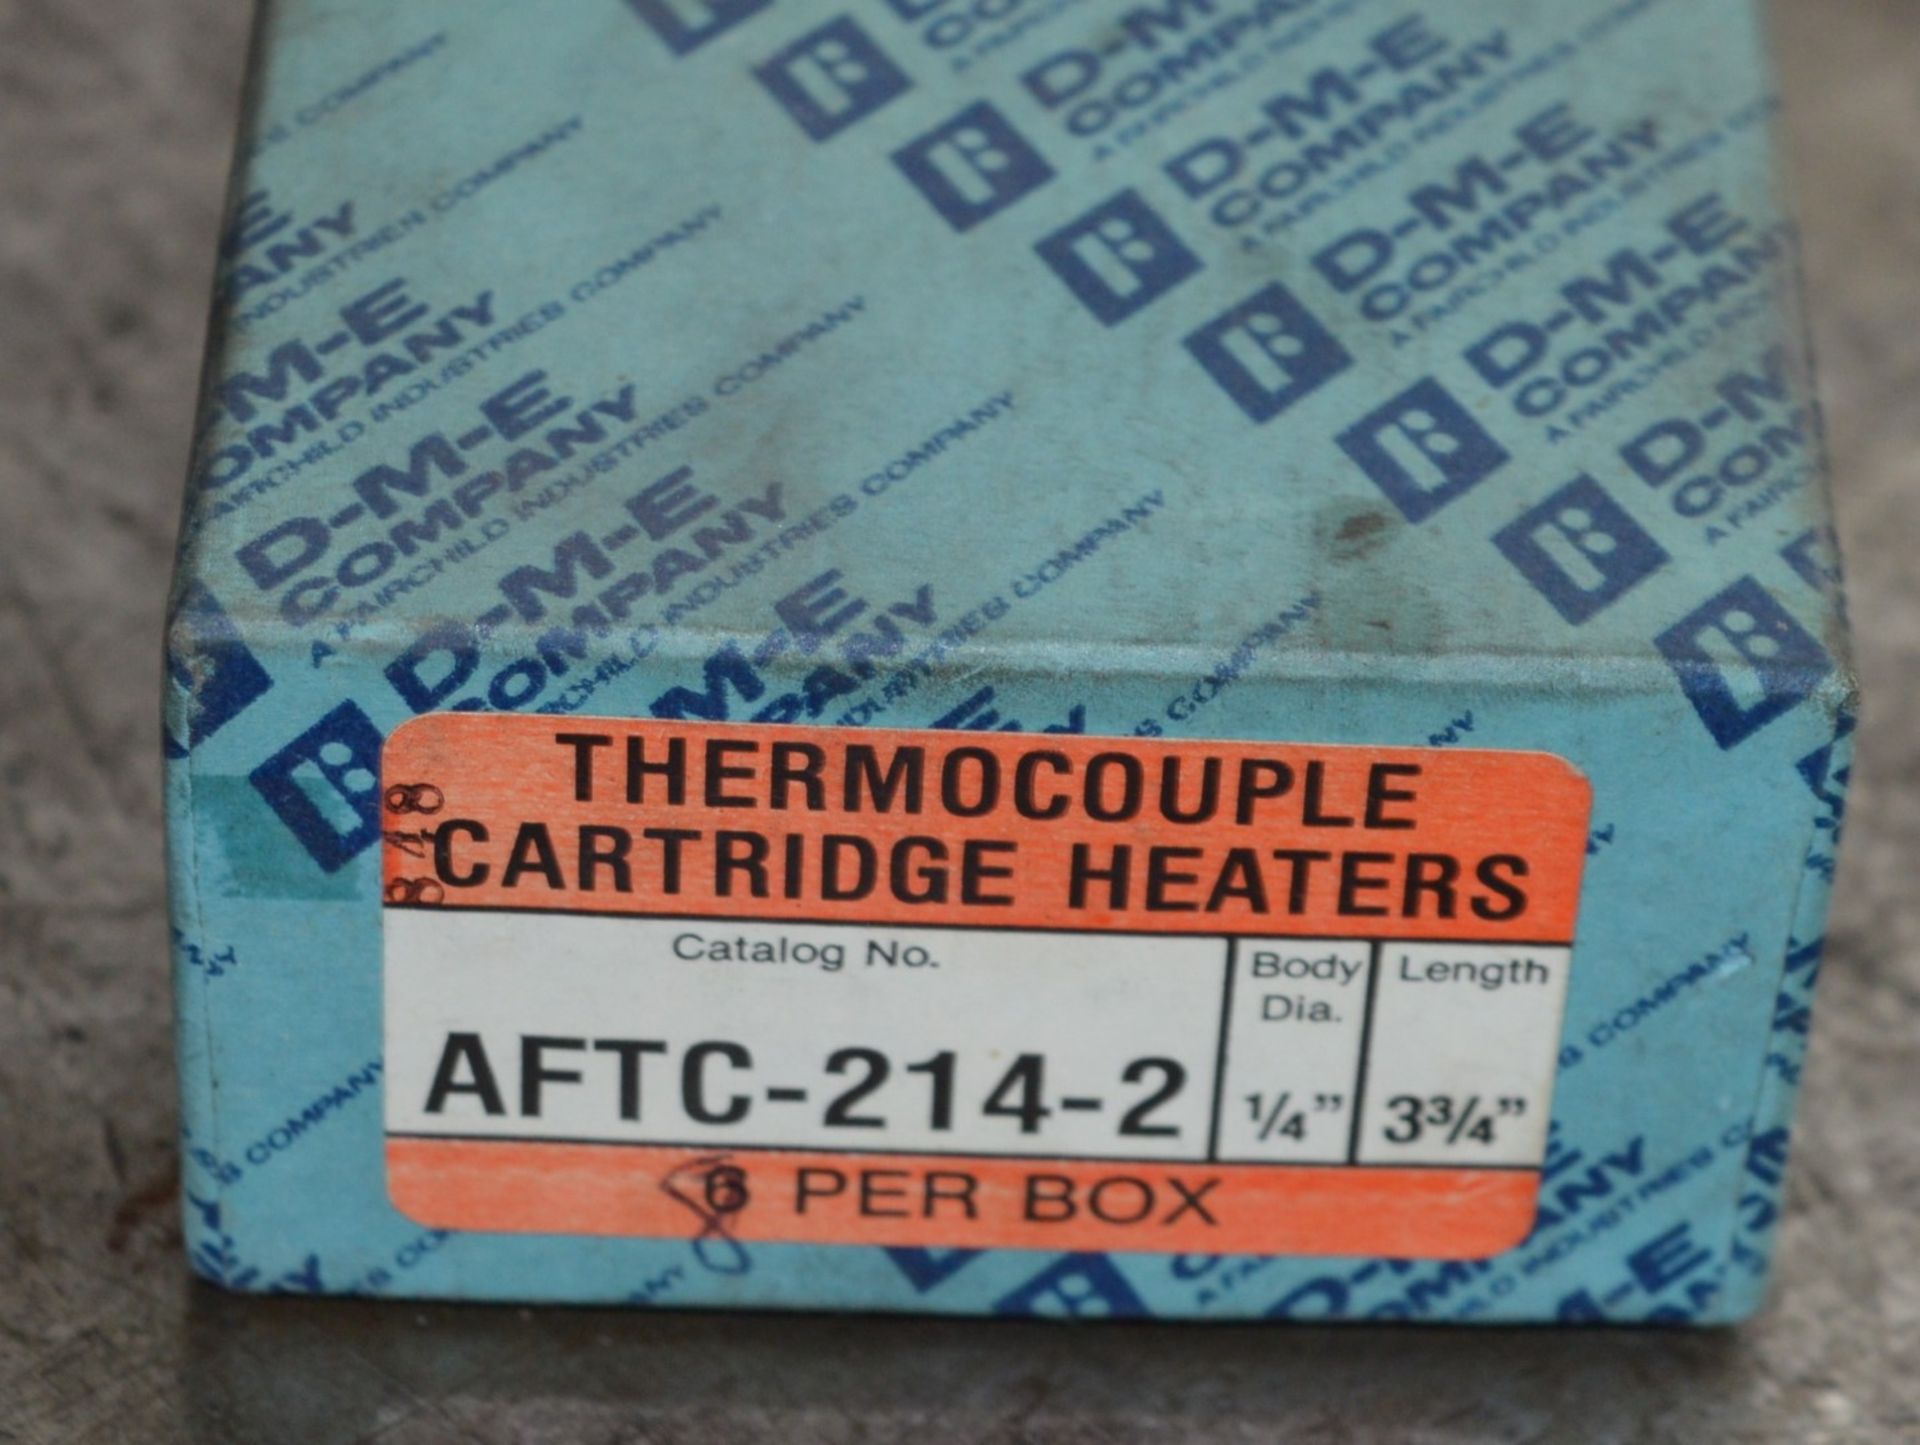 4 x Thermocouple Cartridge Heaters - New Sealed Packets - DME Branded - CL202 - Ref EN066 - - Image 3 of 4